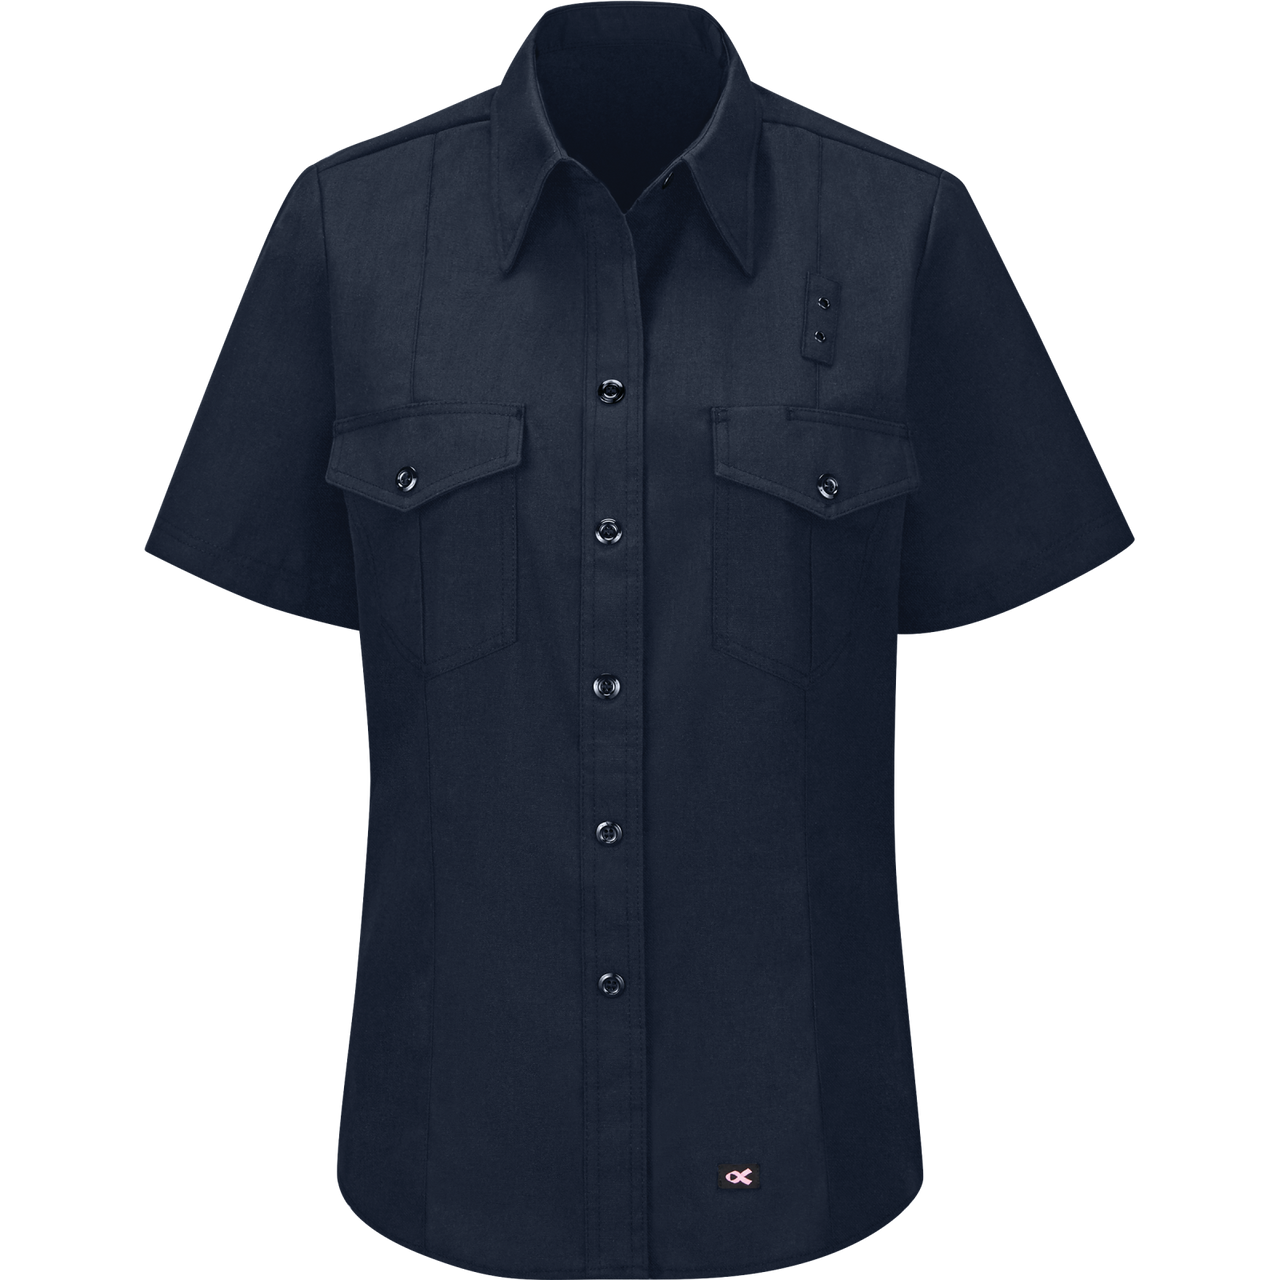 Workrite Women's Classic Short Sleeve Firefighter Shirt (FSF3)| Fire Store | Fuego Fire Center | Firefighter Gear | Made with durable, flame-resistant Nomex® IIIA fabric and autoclaved with our proprietary PerfectPress® process to give you a professional appearance that lasts. Designed specifically with women in mind.